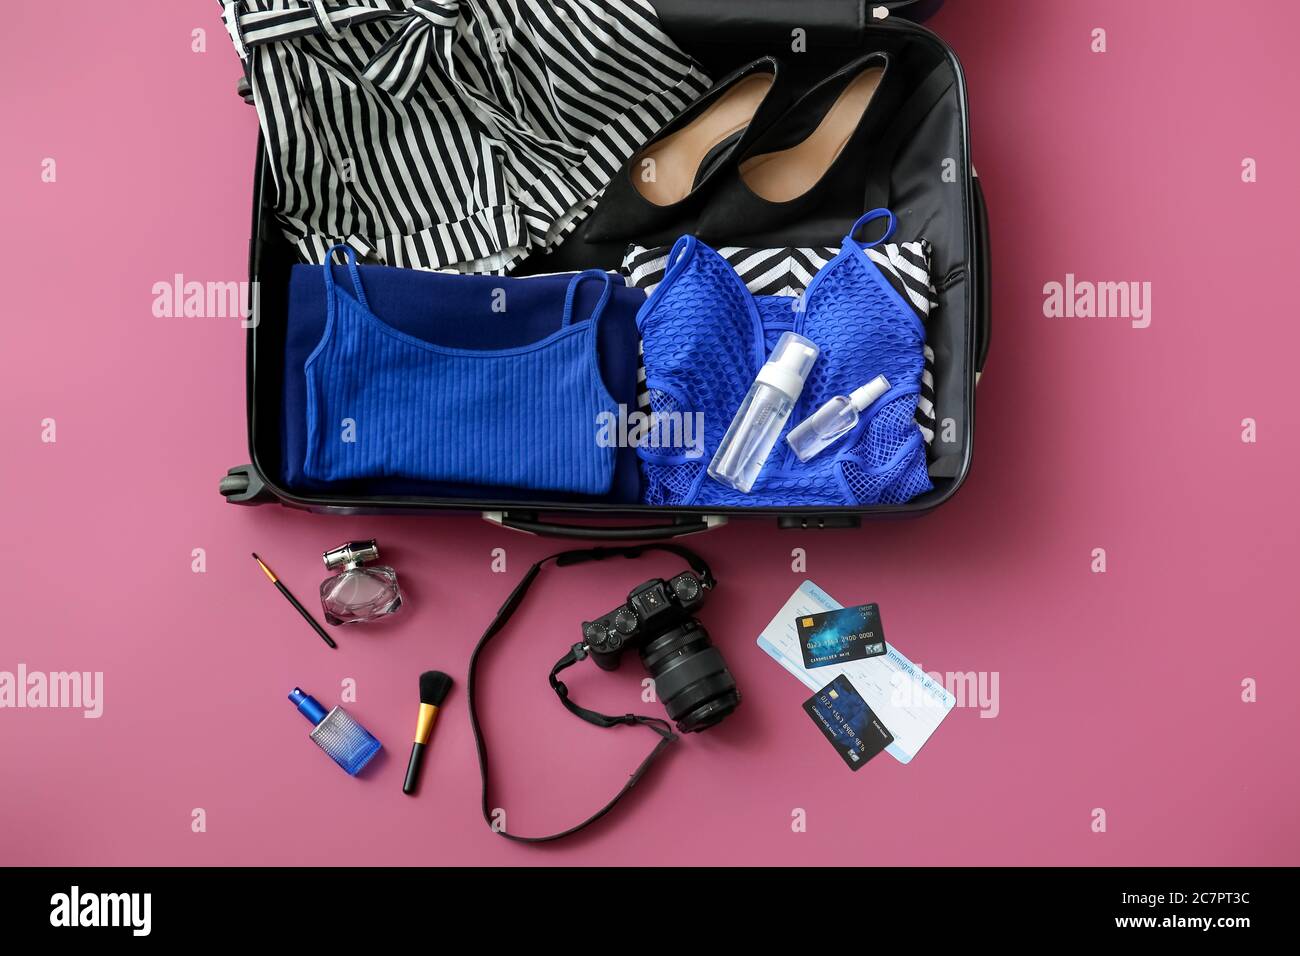 https://c8.alamy.com/comp/2C7PT3C/open-packed-suitcase-and-accessories-on-color-background-2C7PT3C.jpg